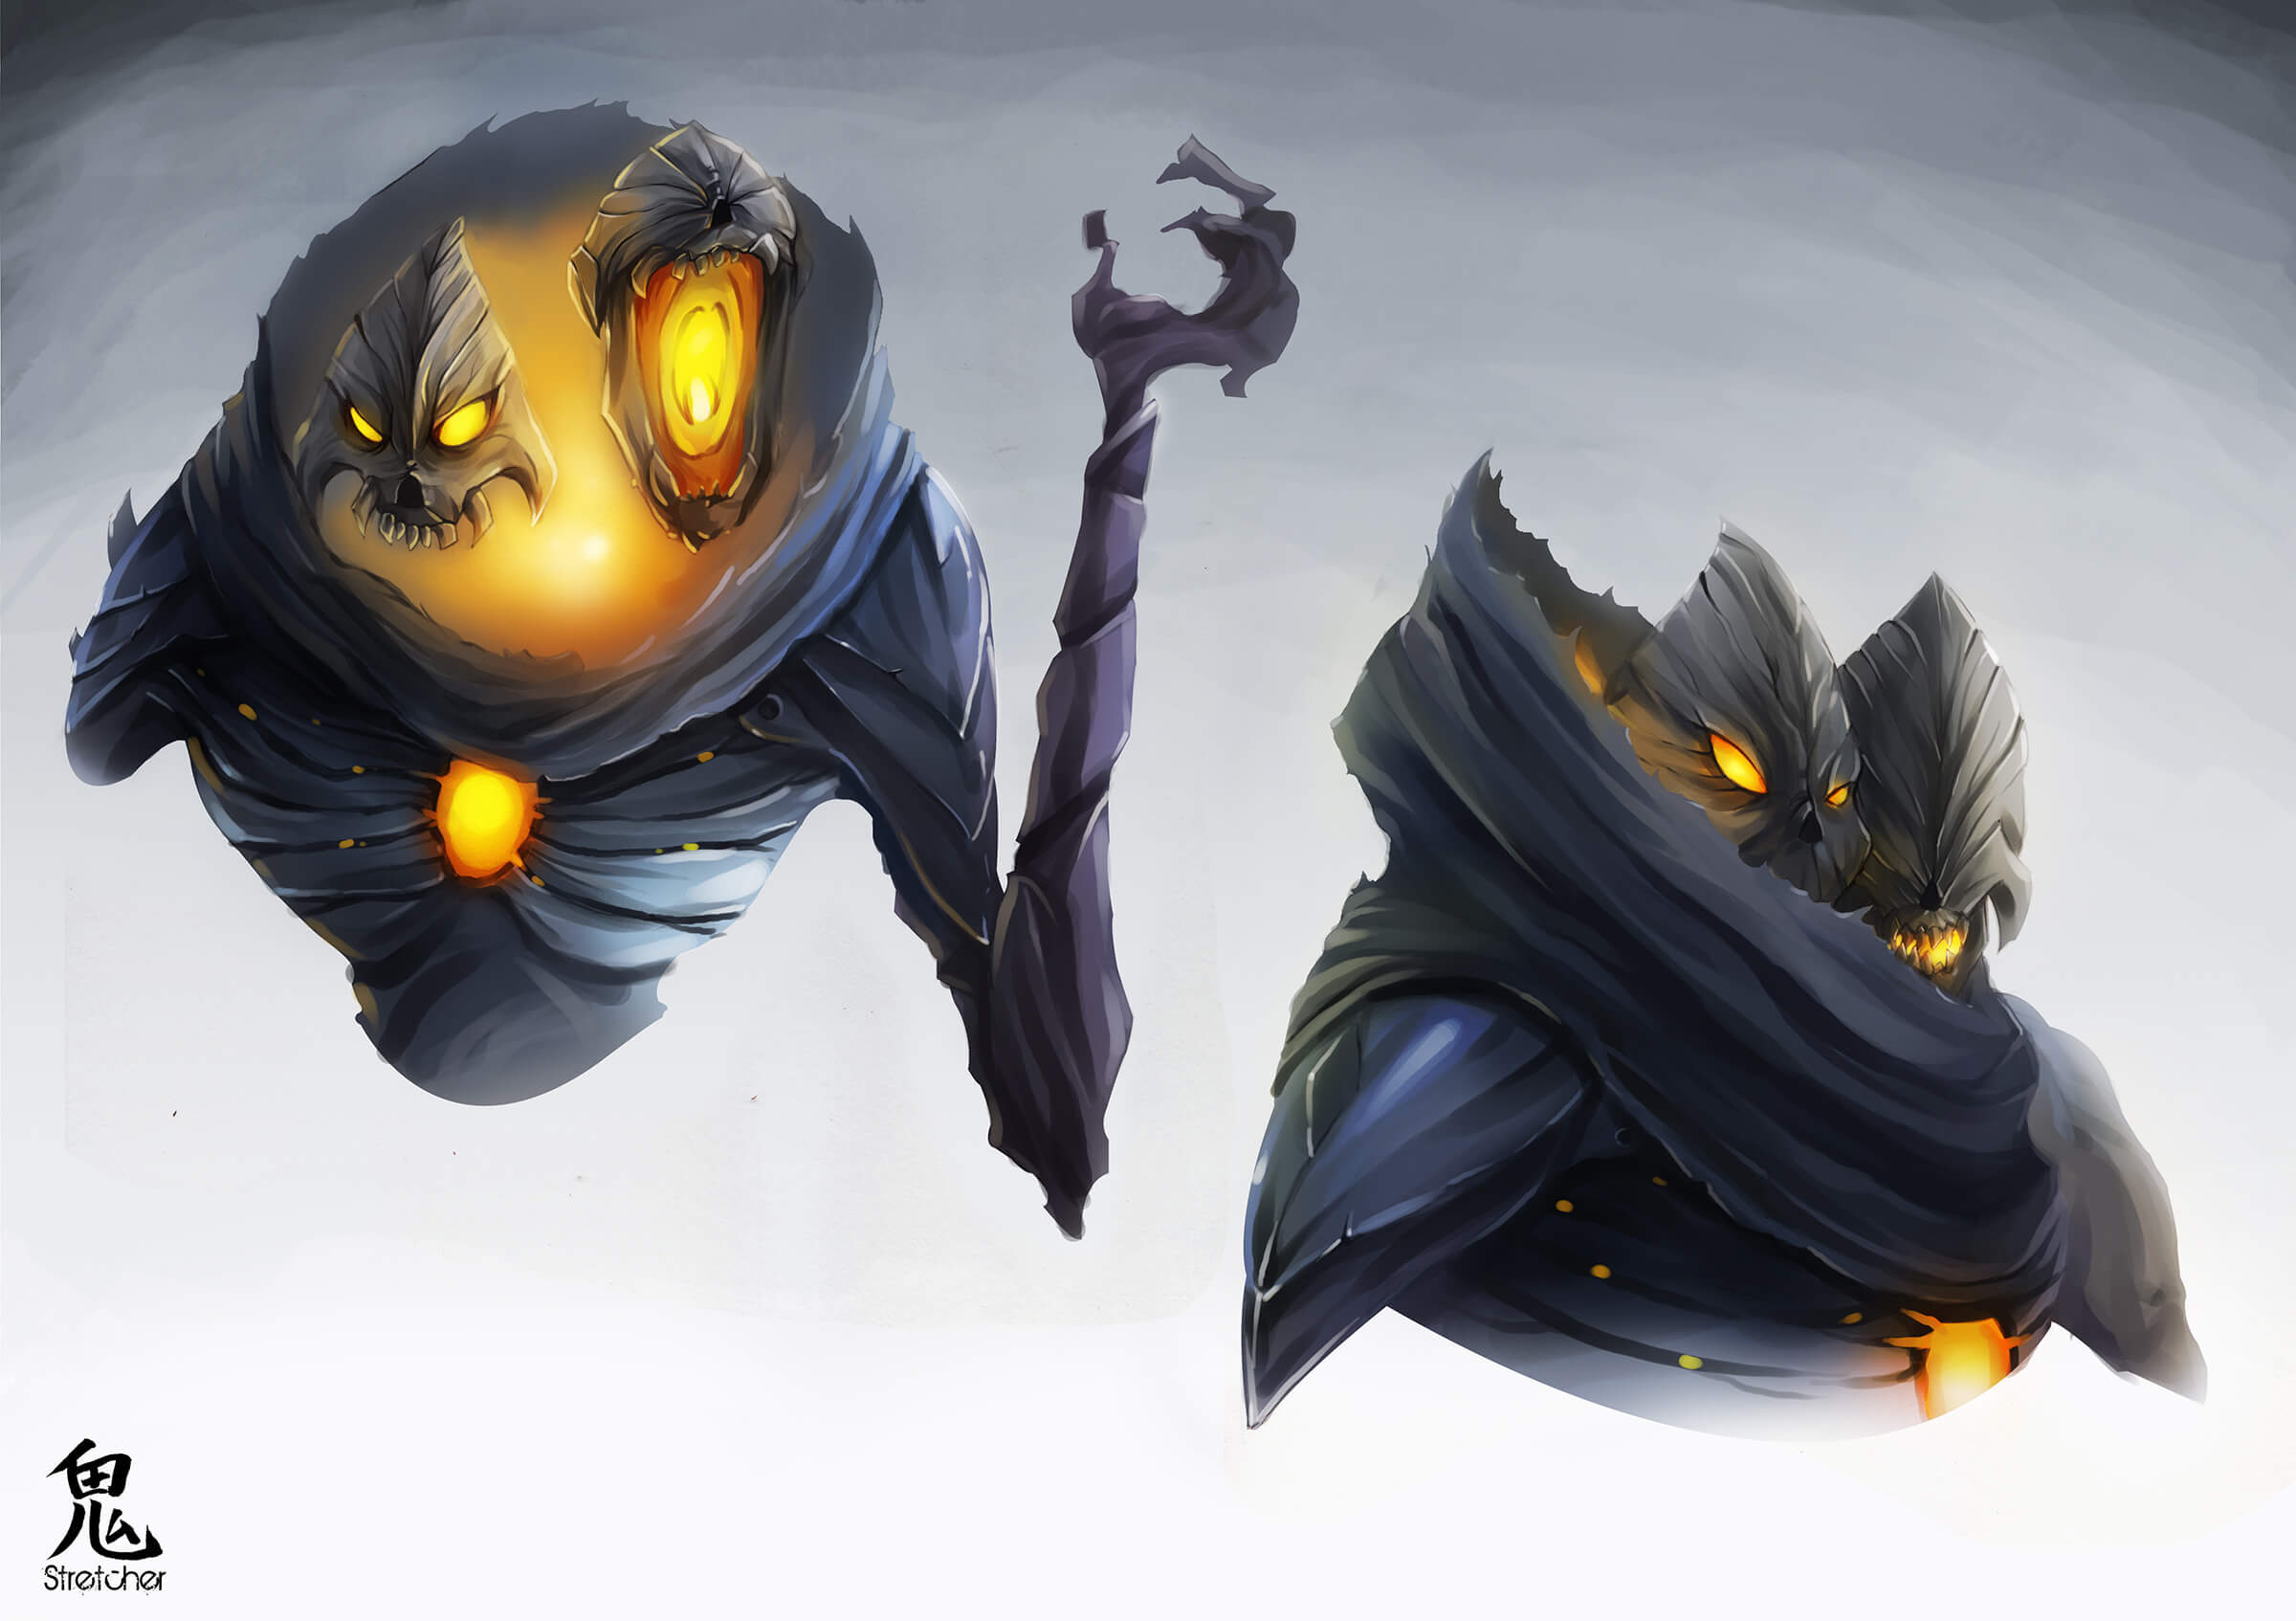 Concept art of a gray, demonic character with two heads, glowing orange from its eyes, neck, and chest.